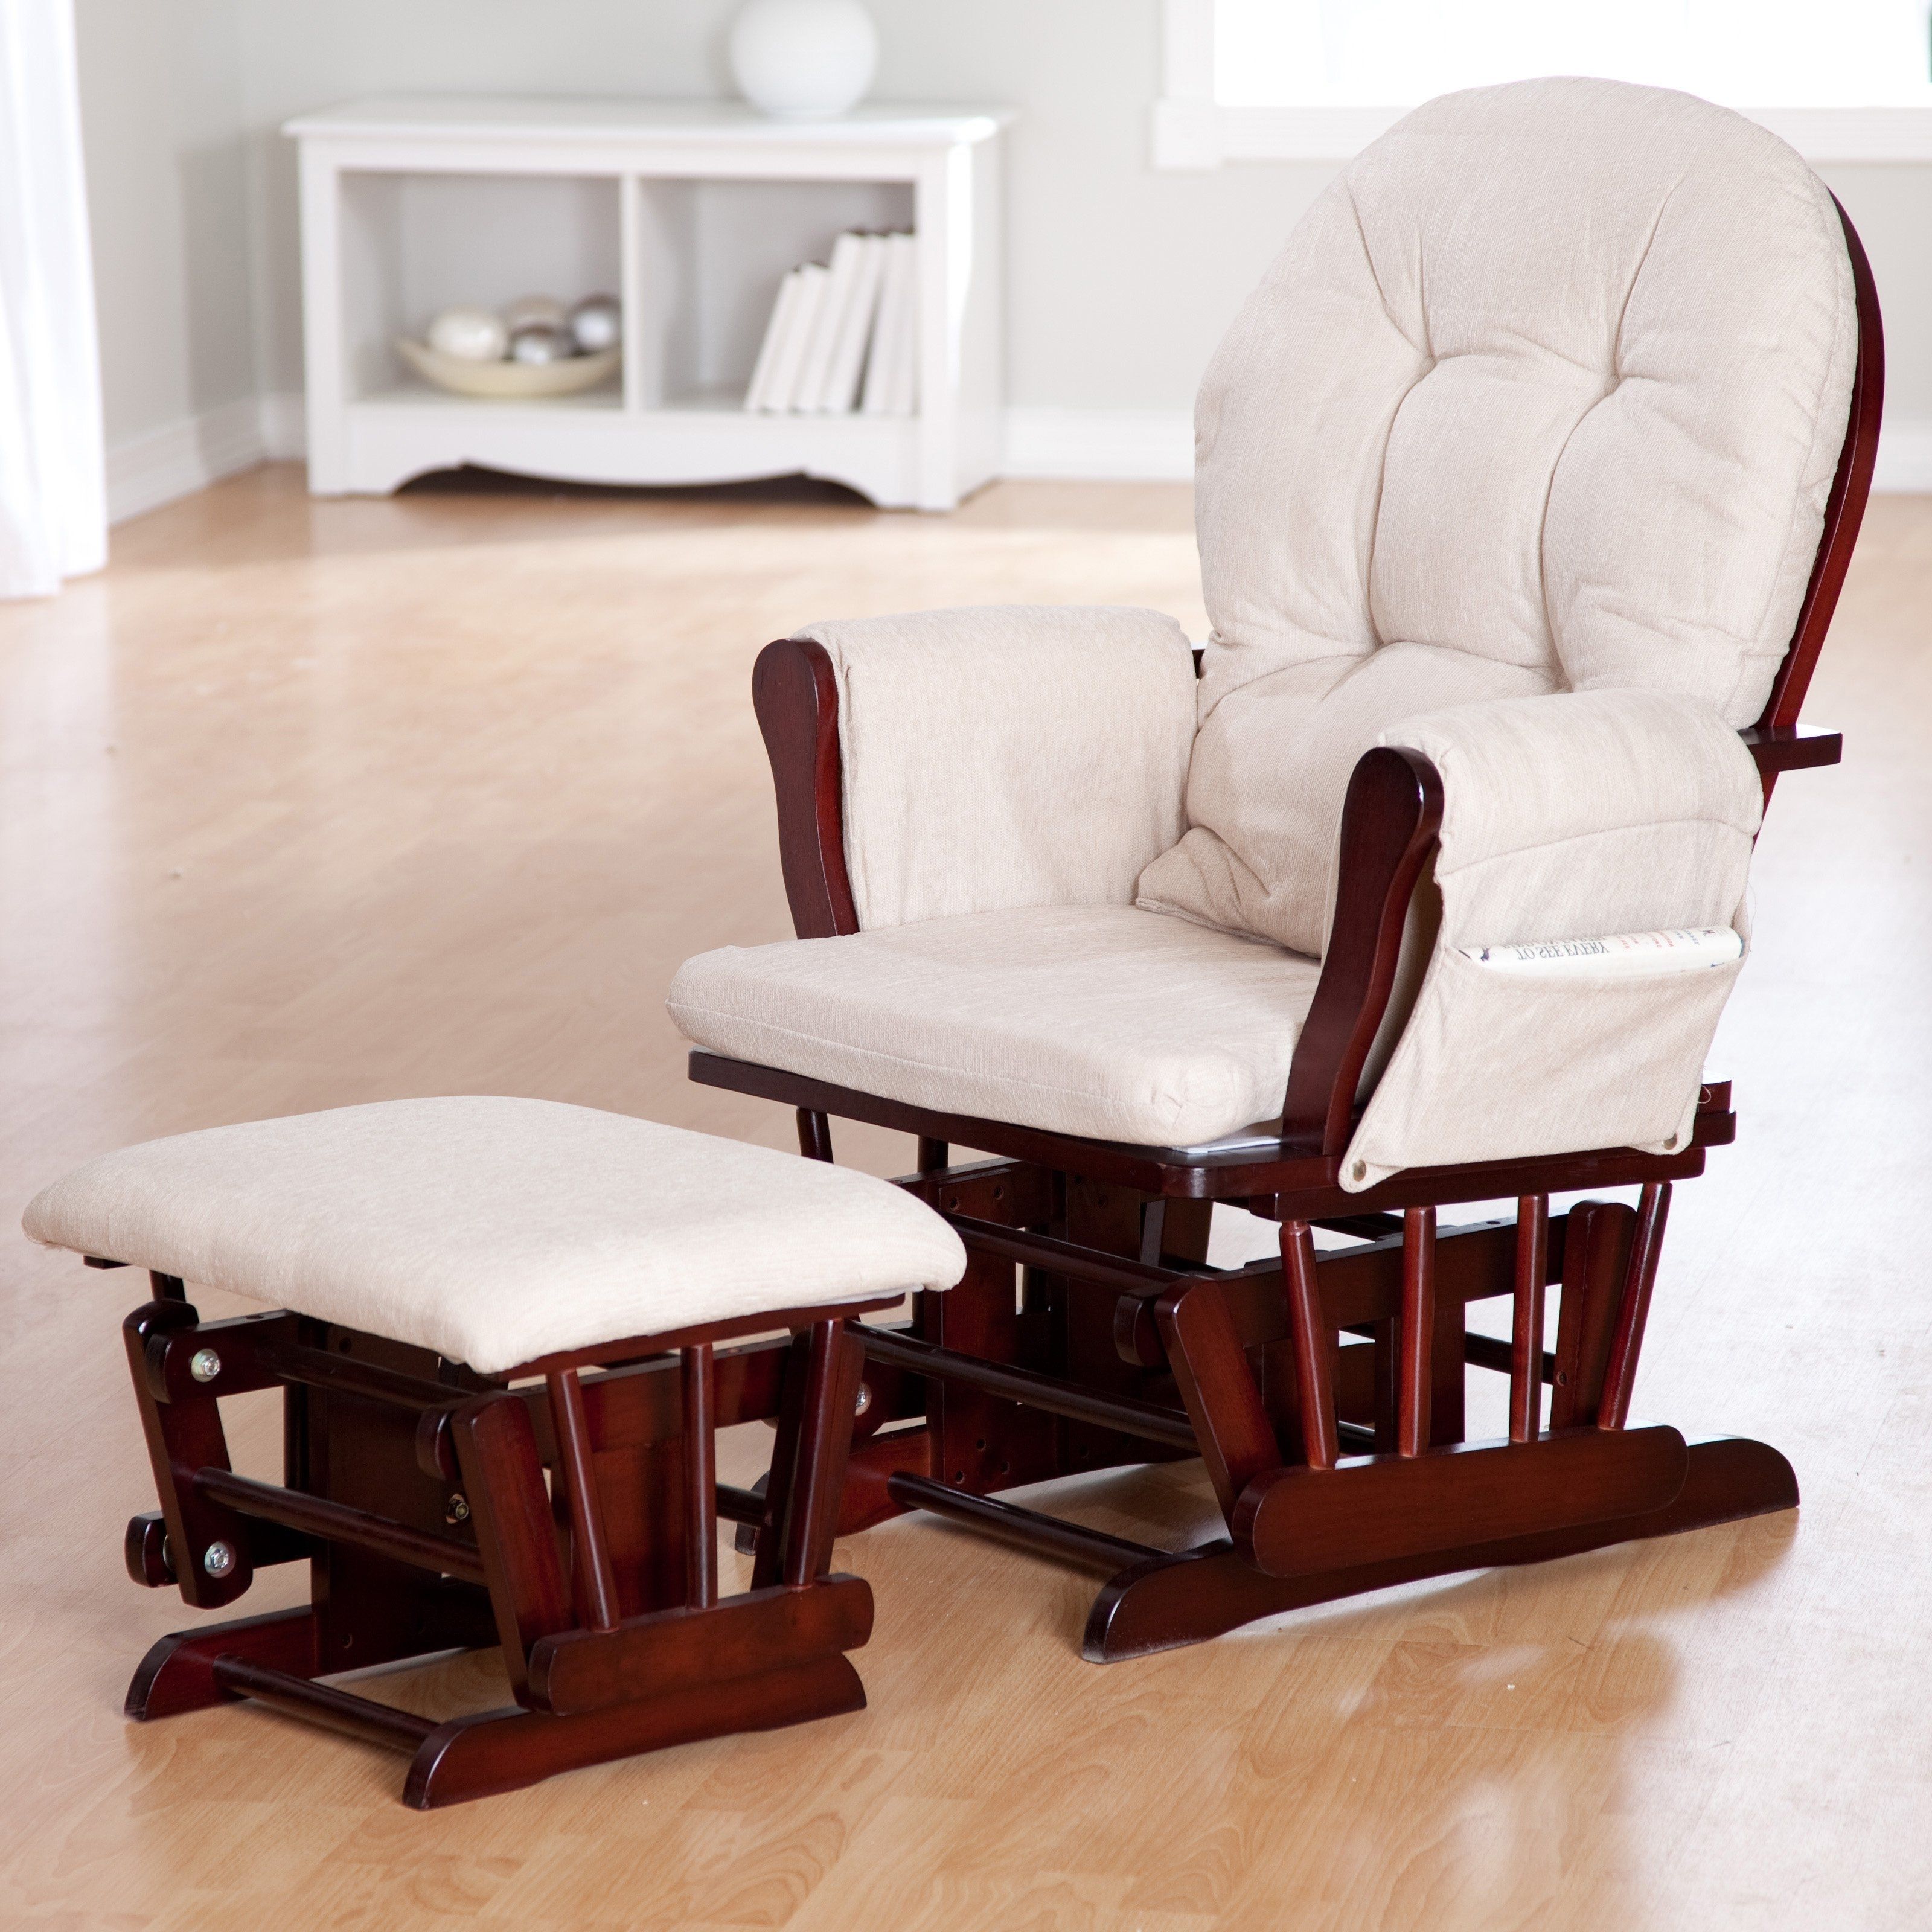 Rocking Nursery Chair – Noakijewelry In Recent Rocking Chairs With Footstool (View 14 of 15)